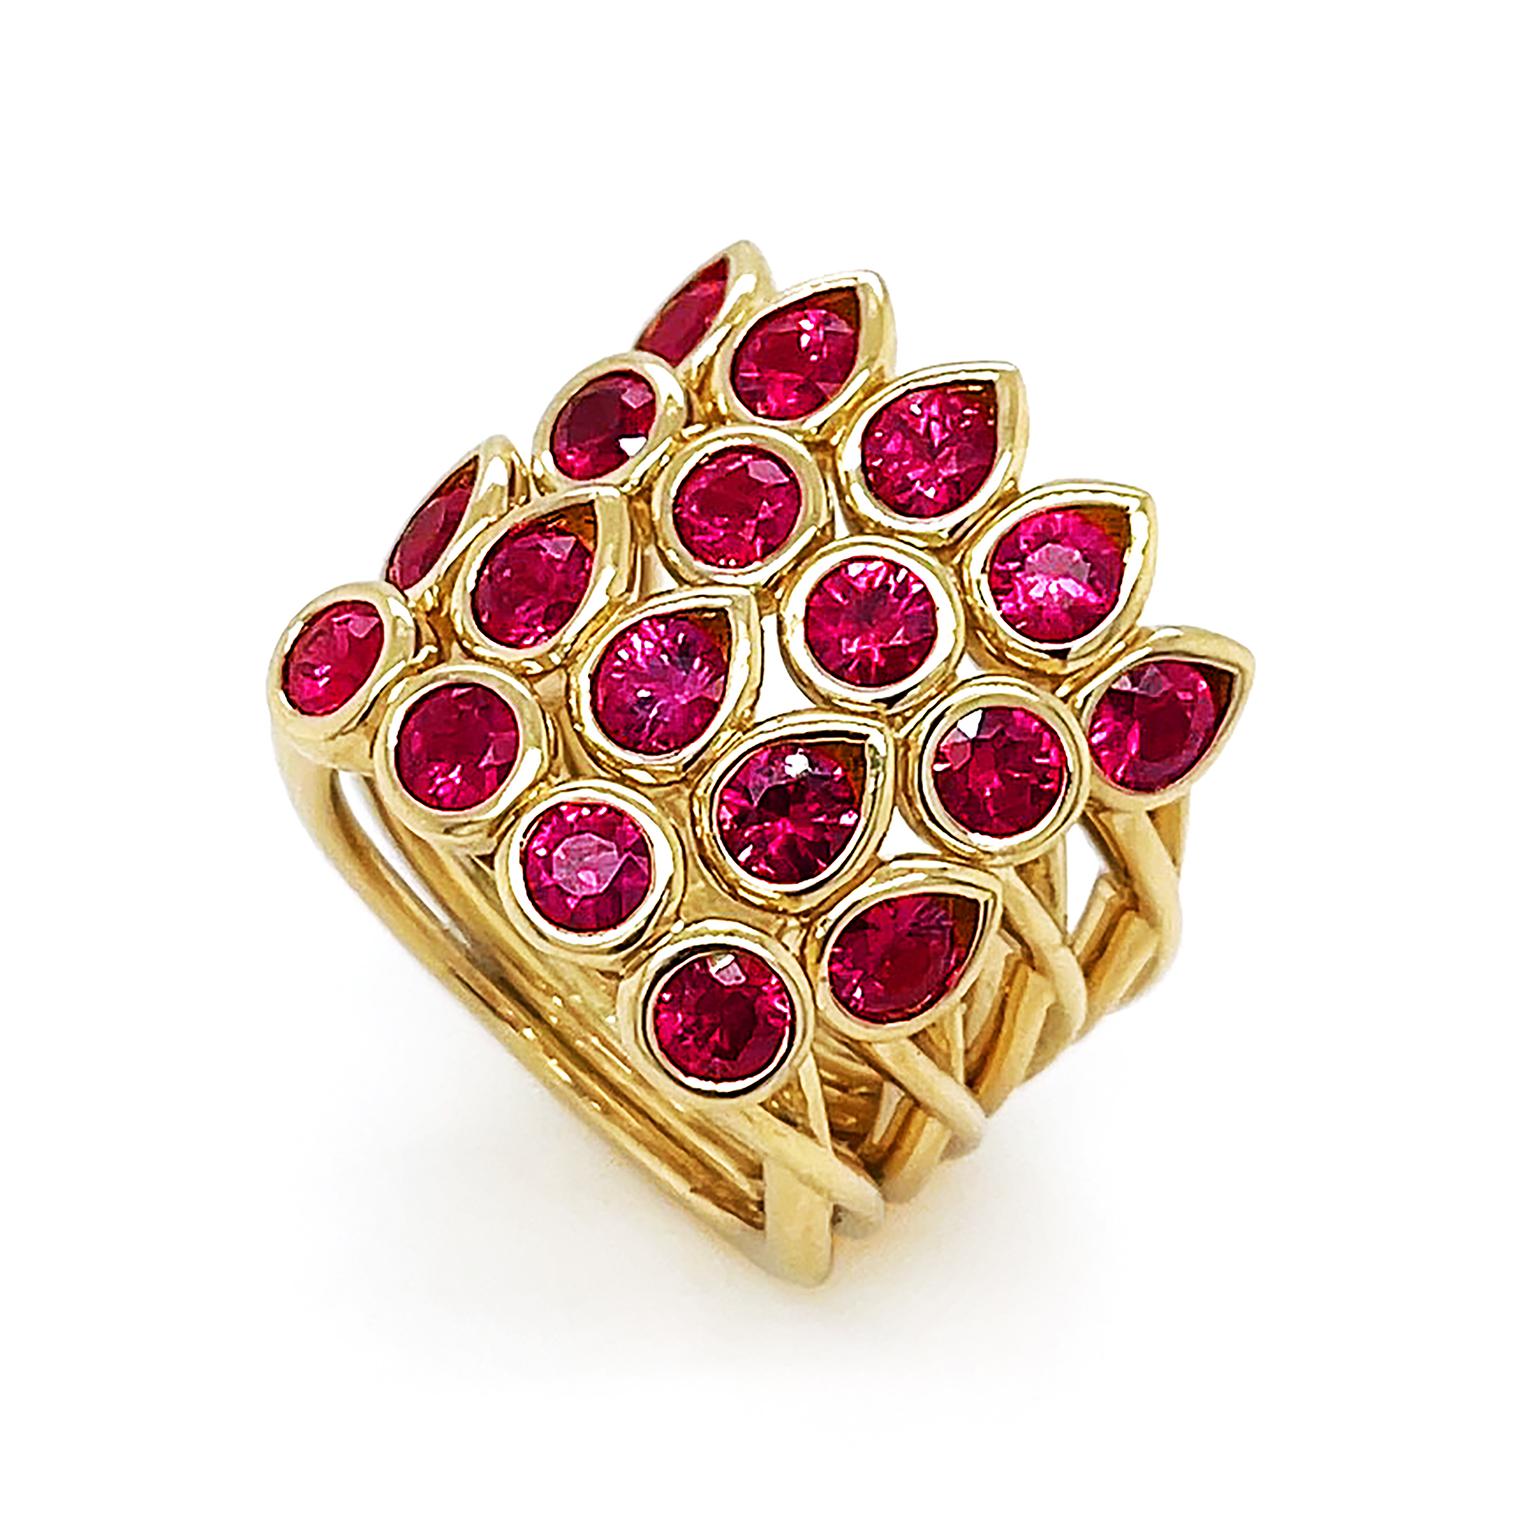 Majestic rubies flicker exceptional red and pink undertones. 18k yellow gold bezel settings secure alternating rows of pear and round cuts of the jewel. The illusion of stacked rings is created by each row having its own band, melded together. The